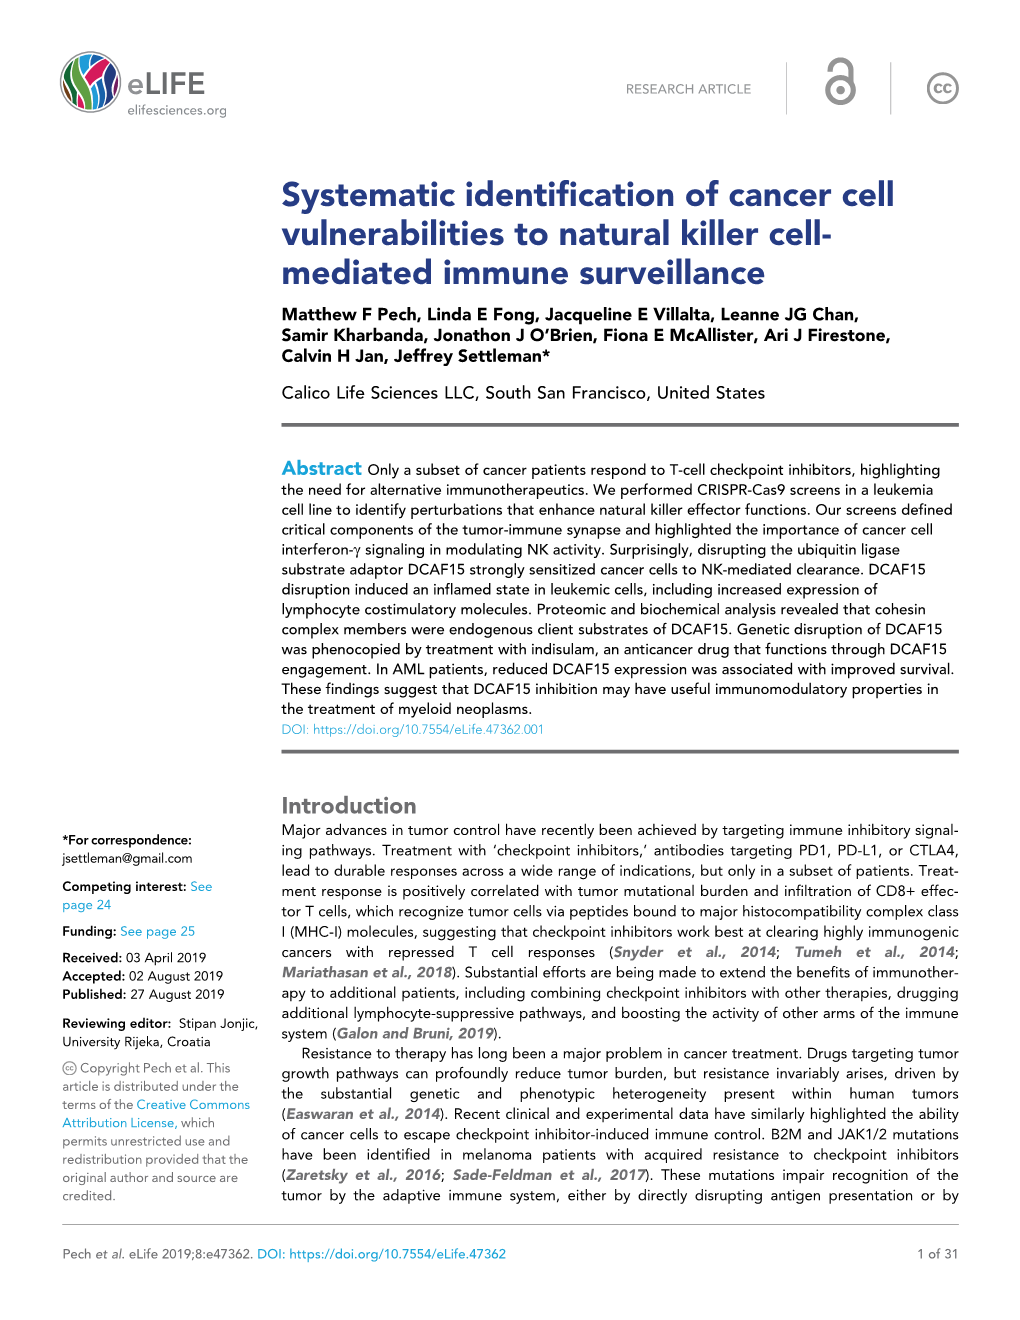 Systematic Identification of Cancer Cell Vulnerabilities to Natural Killer Cell